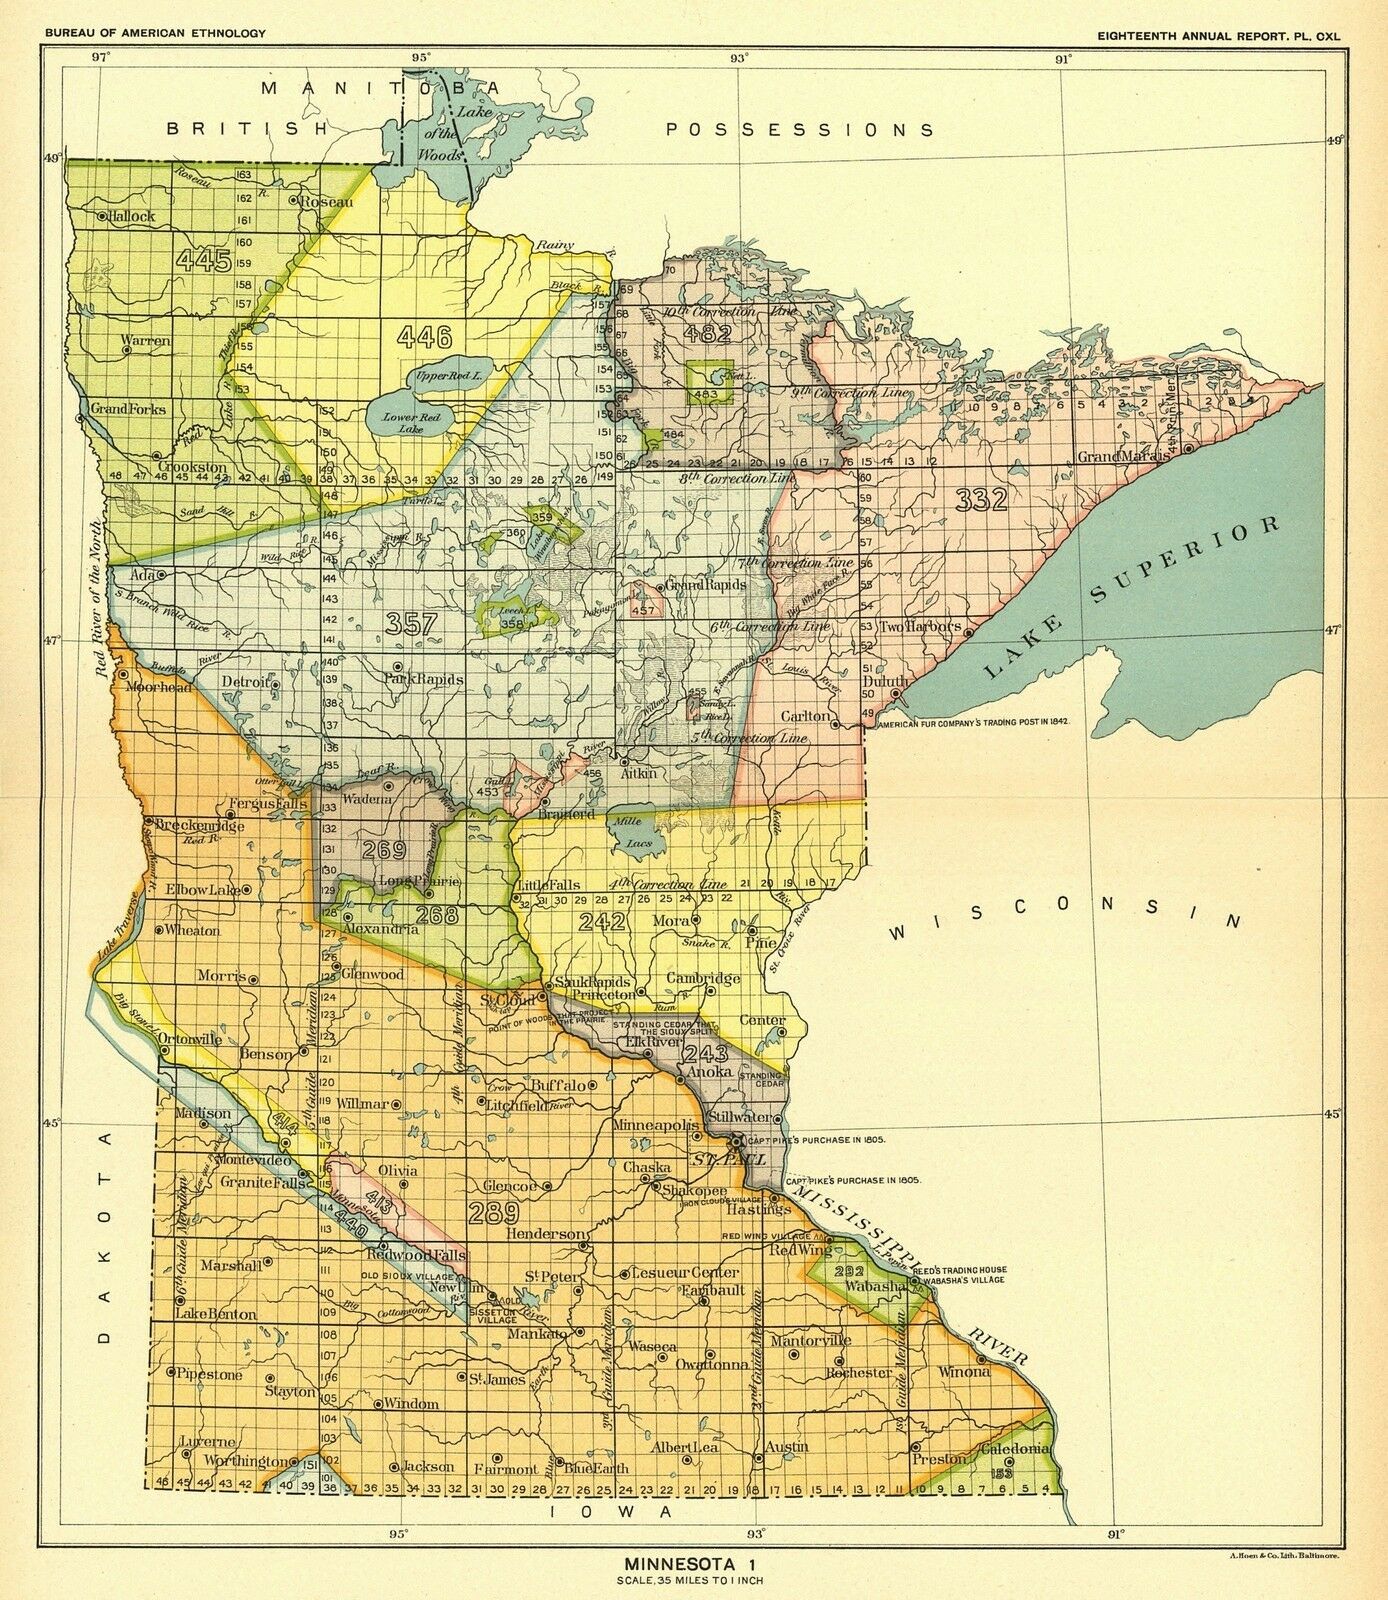 1896 map Minnesota 1 United States Indian land cessions POSTER 33